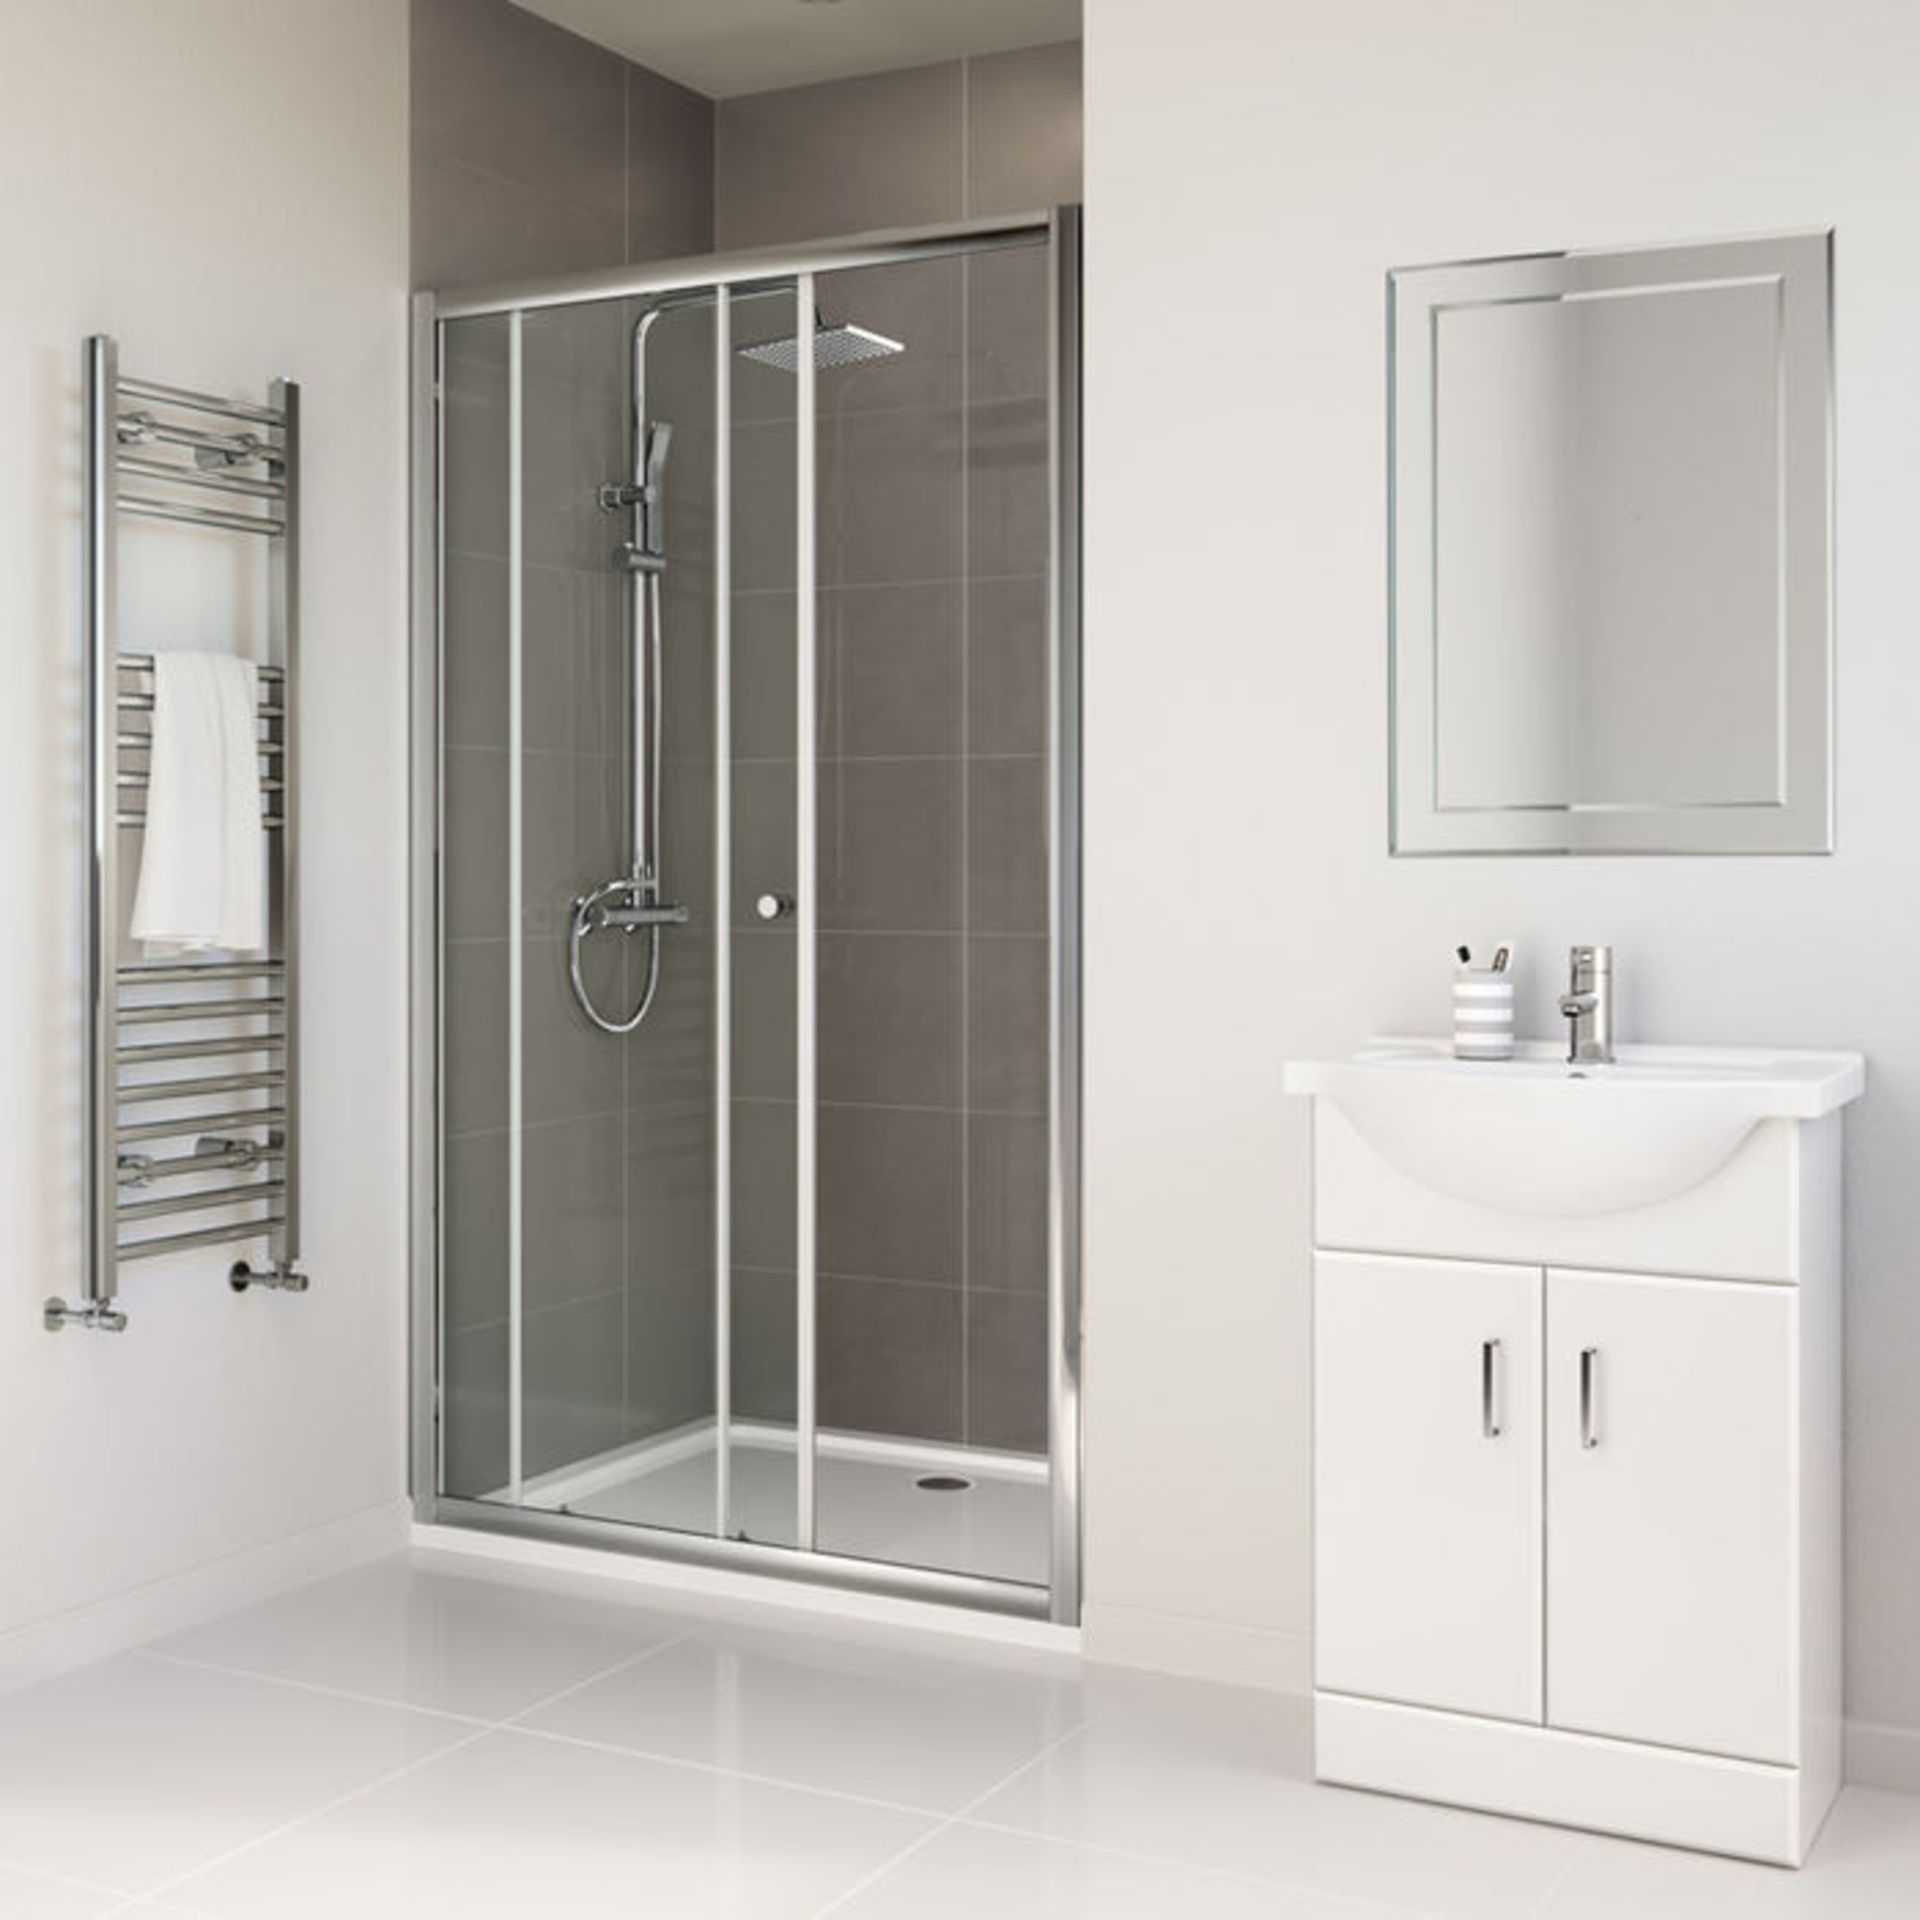 (DK155) 1000mm - Elements Sliding Shower Door. RRP £299.99. 4mm Safety Glass Fully waterproof tested - Image 3 of 4